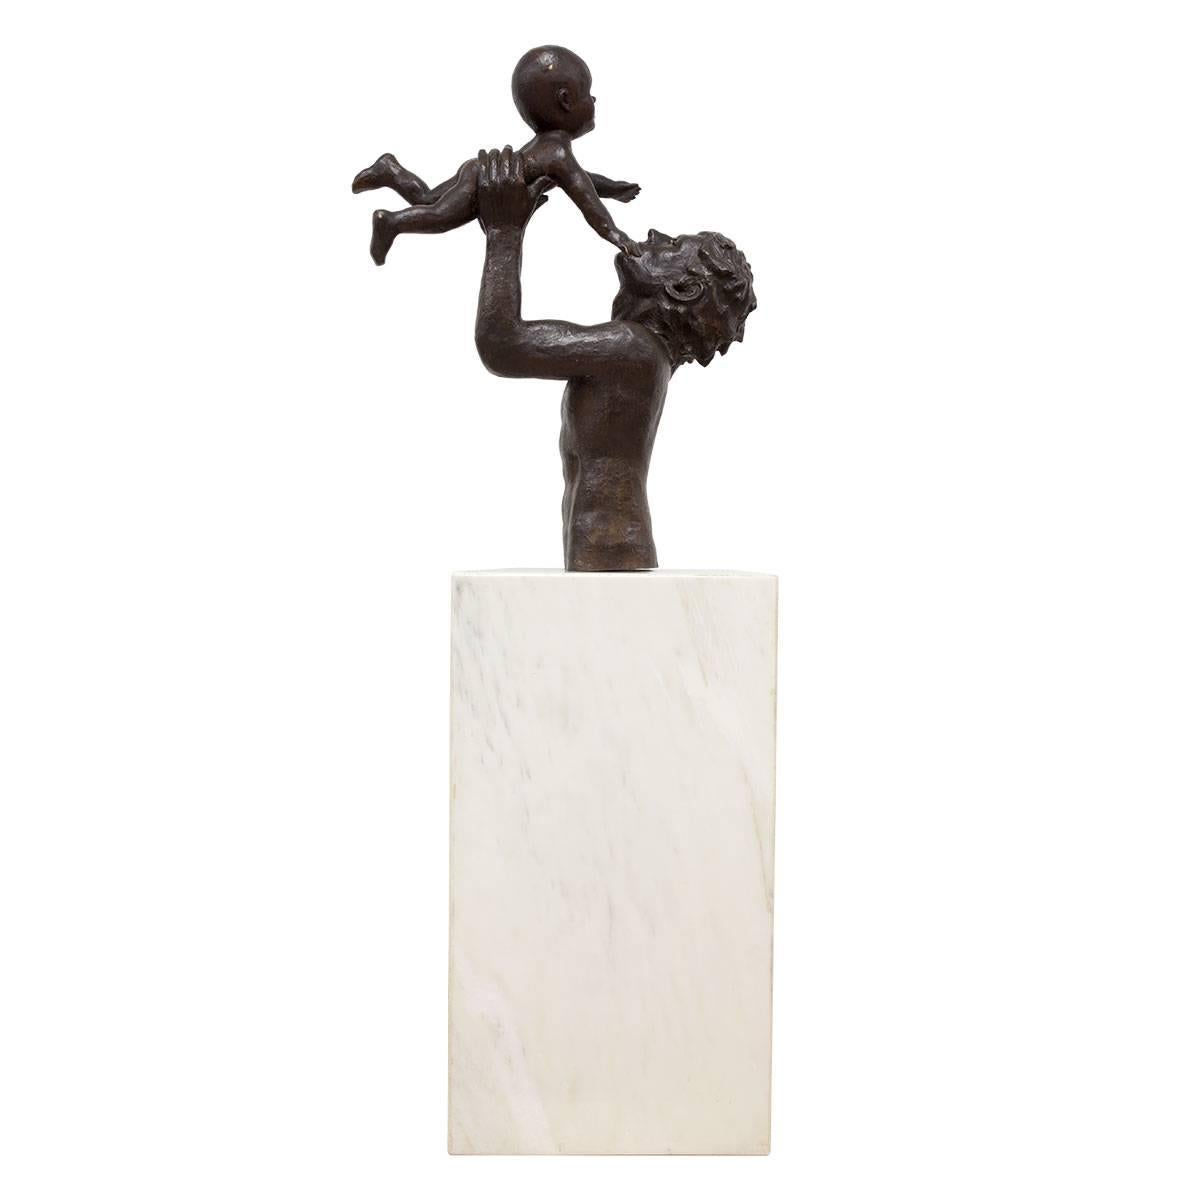 In this sculpture the Mexican artist Victor Salmones renders the image of a father holding a first born child using the lost wax casting method, the sculpture is mounted on a large marble base. 
This sculpture is signed by the artist, and numbered